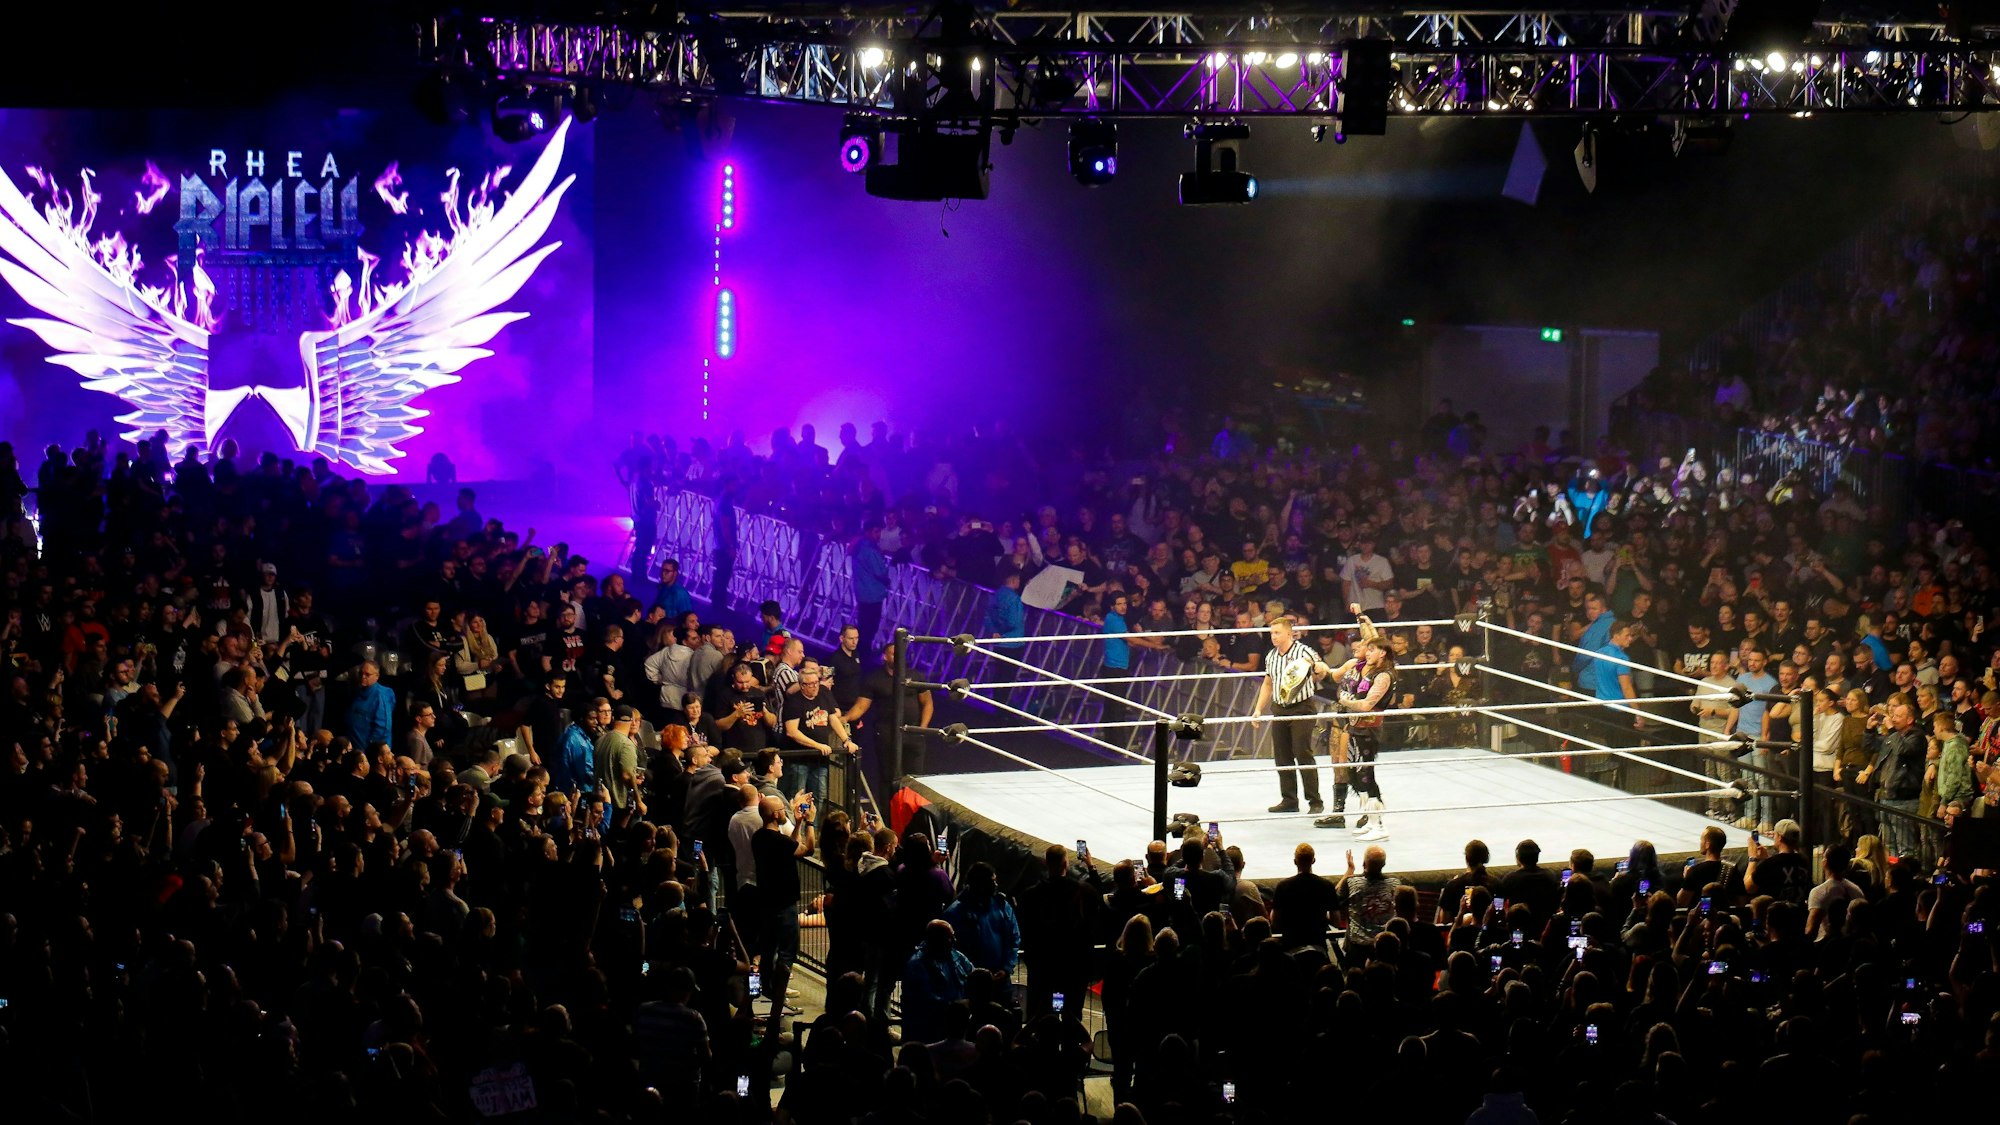 WWE Live in der Lanxess-Arena.